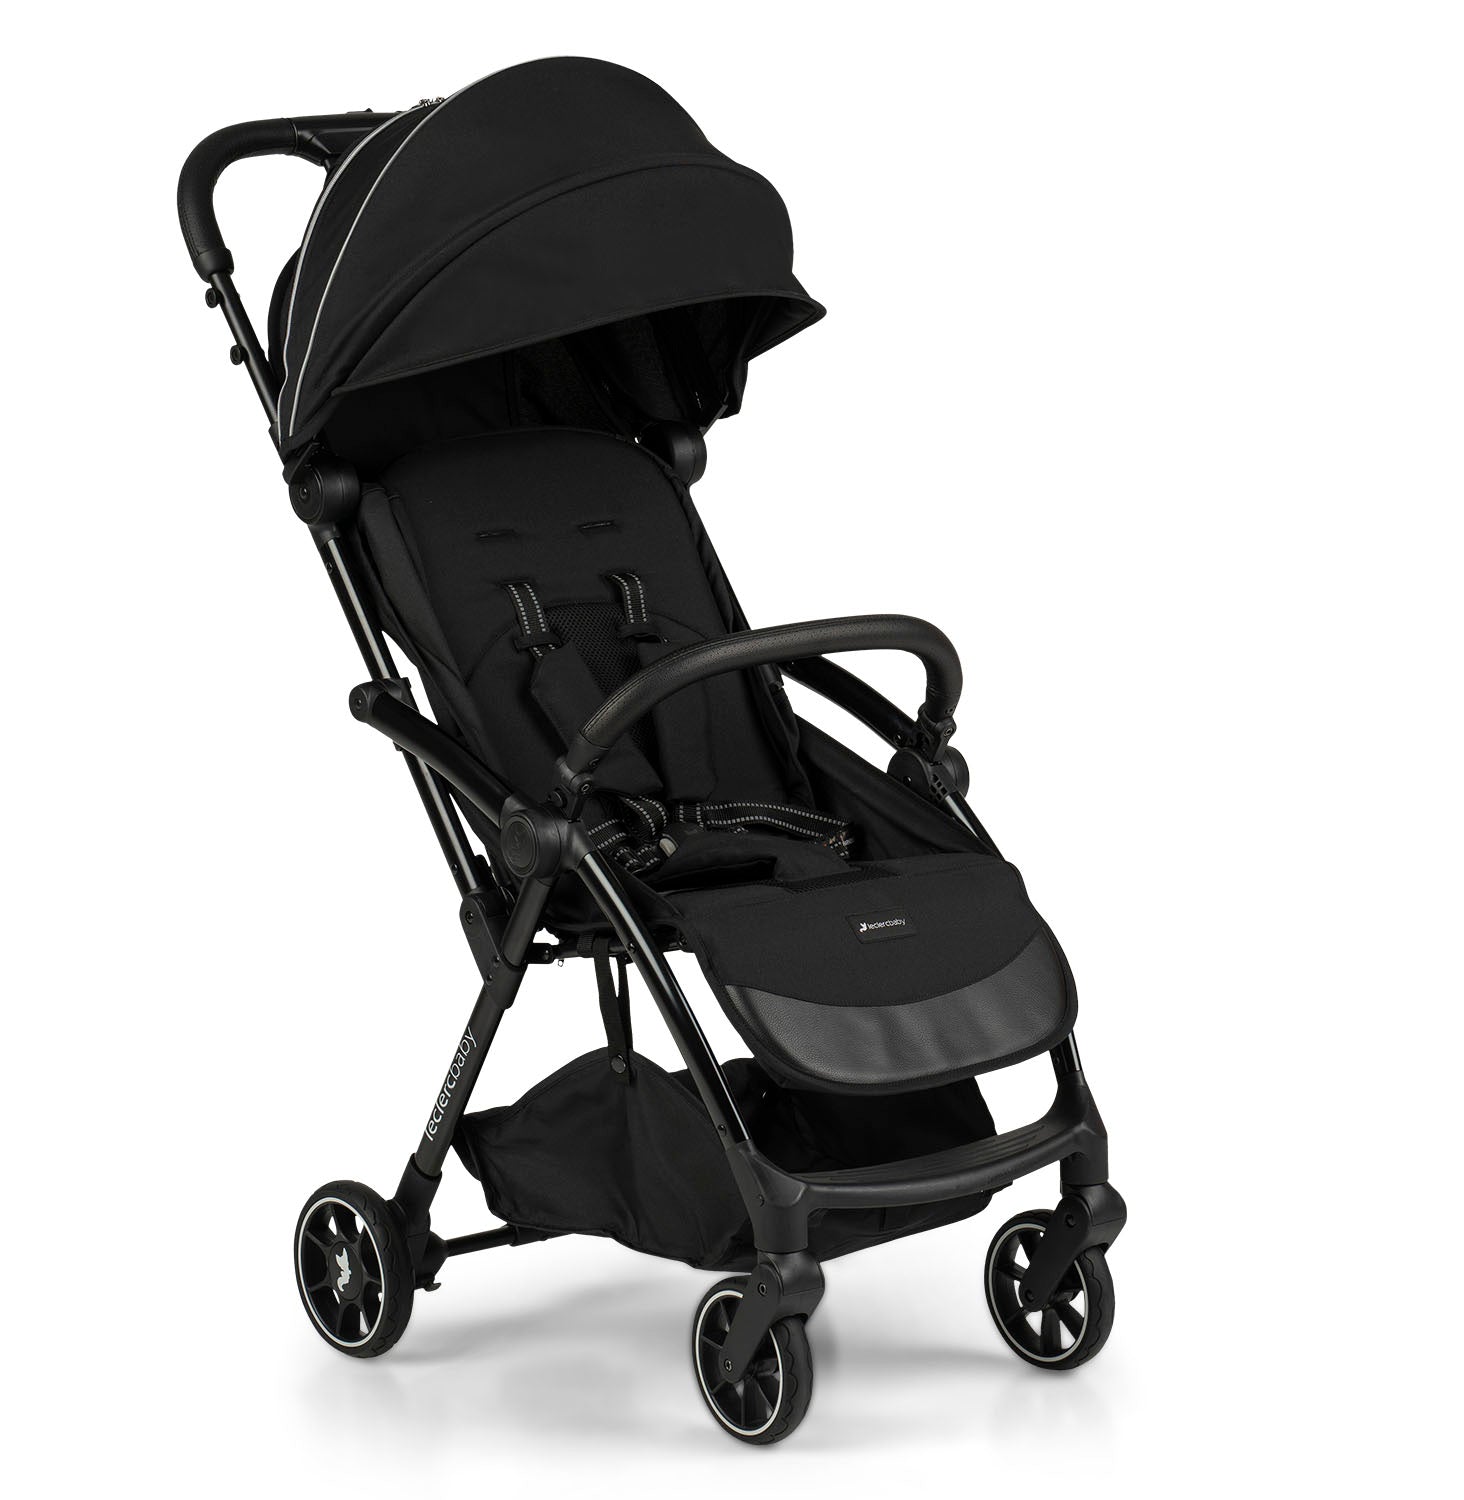 Influencer Air Twin Stroller Bundle : Piano Black Stroller + Piano Black Stroller